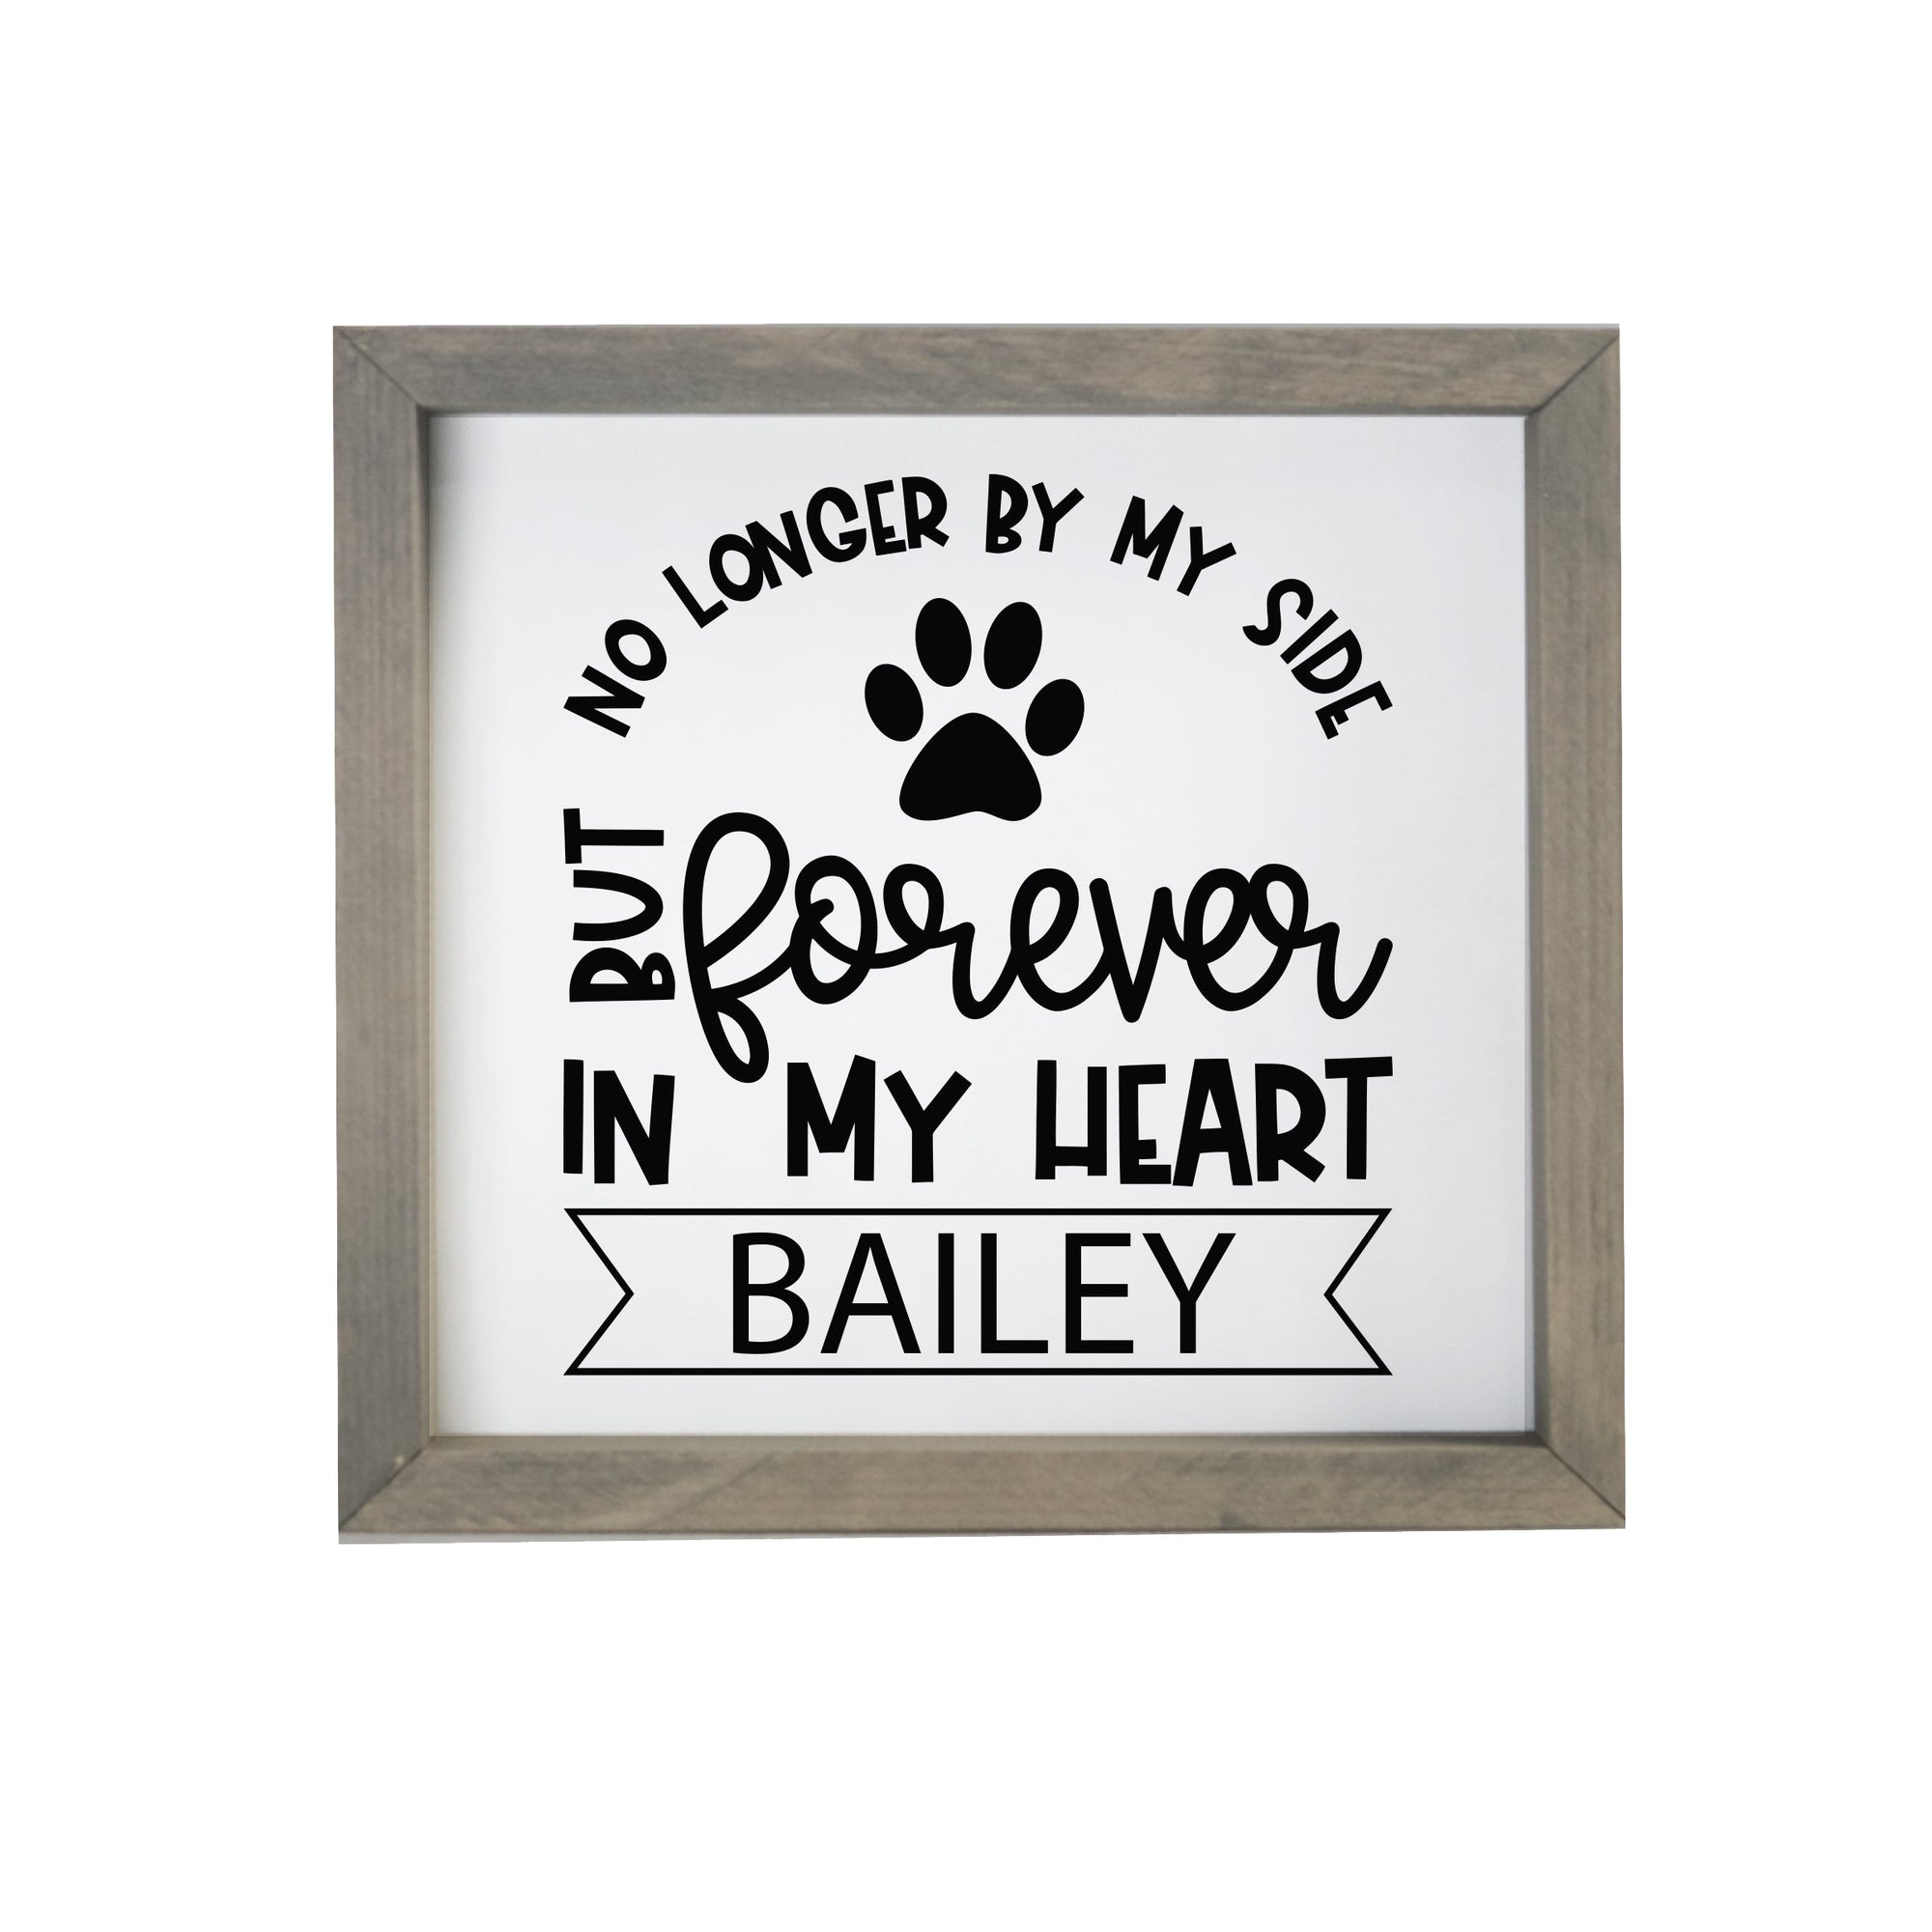 11.5x11.5 Grey Framed Pet Memorial Shadow Box with phrase "No Longer By My Side"